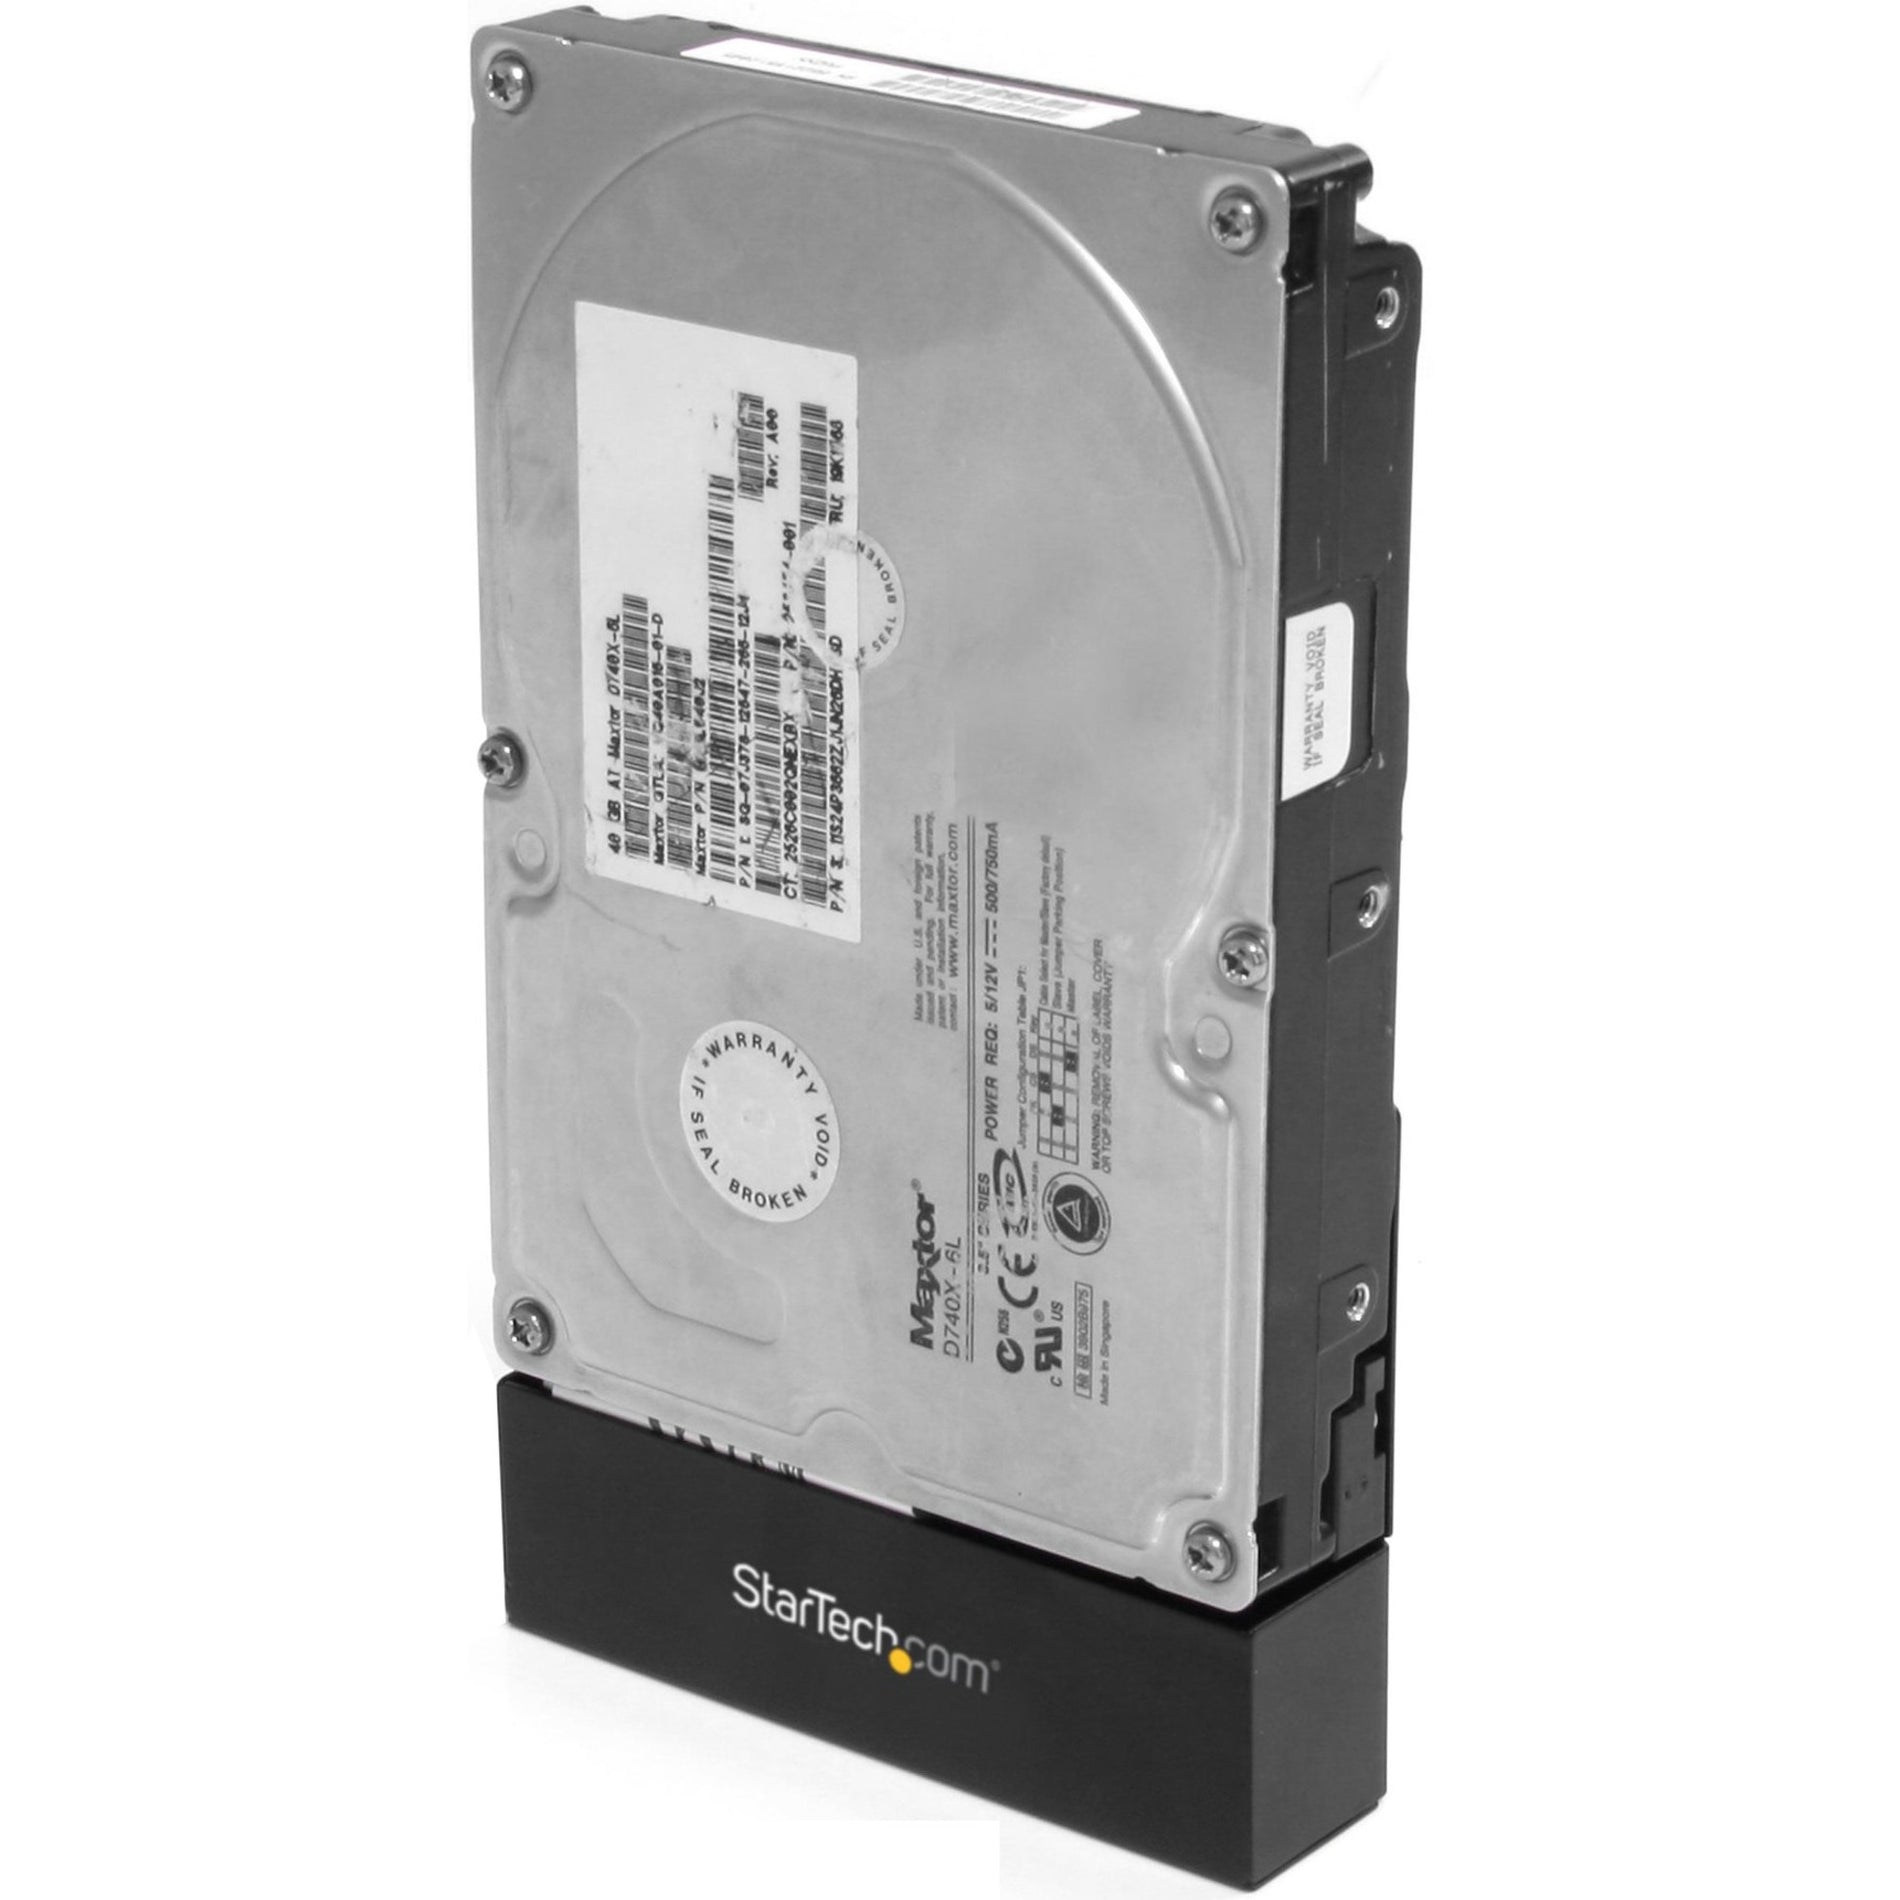 StarTech.com SAT2IDEADP SATA to 2.5in or 3.5in IDE Hard Drive Adapter for HDD Docks, Easy Data Transfer and Compatibility